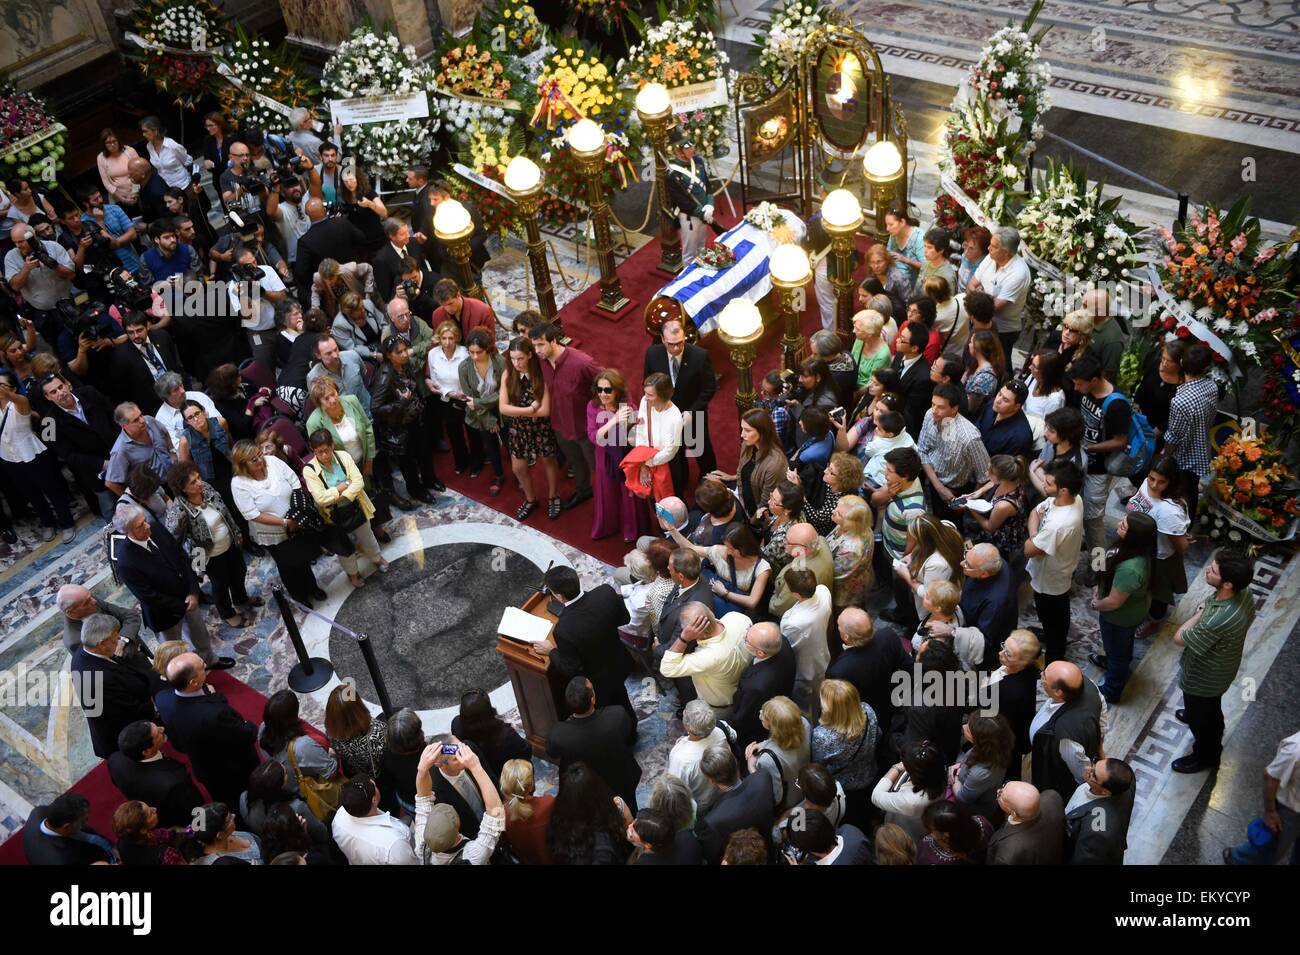 Montevideo, Uruguay. 14th Apr, 2015. People gather around the coffin of Uruguayan writer Eduardo Galeano, during the tribute organized by the government of Uruguay, in the Hall of Lost Steps of the Legislative Palace, in Montevideo, capital of Uruguay, on April 14, 2015. According to local press, Eduardo Galeano, author of 'The Open Veins of Latin America' (1971), died on Monday in Montevideo at the age of 74 years as a result of lung cancer. Galeano's body will be cremated on Wednesday. Credit:  Nicolas Celaya/Xinhua/Alamy Live News Stock Photo